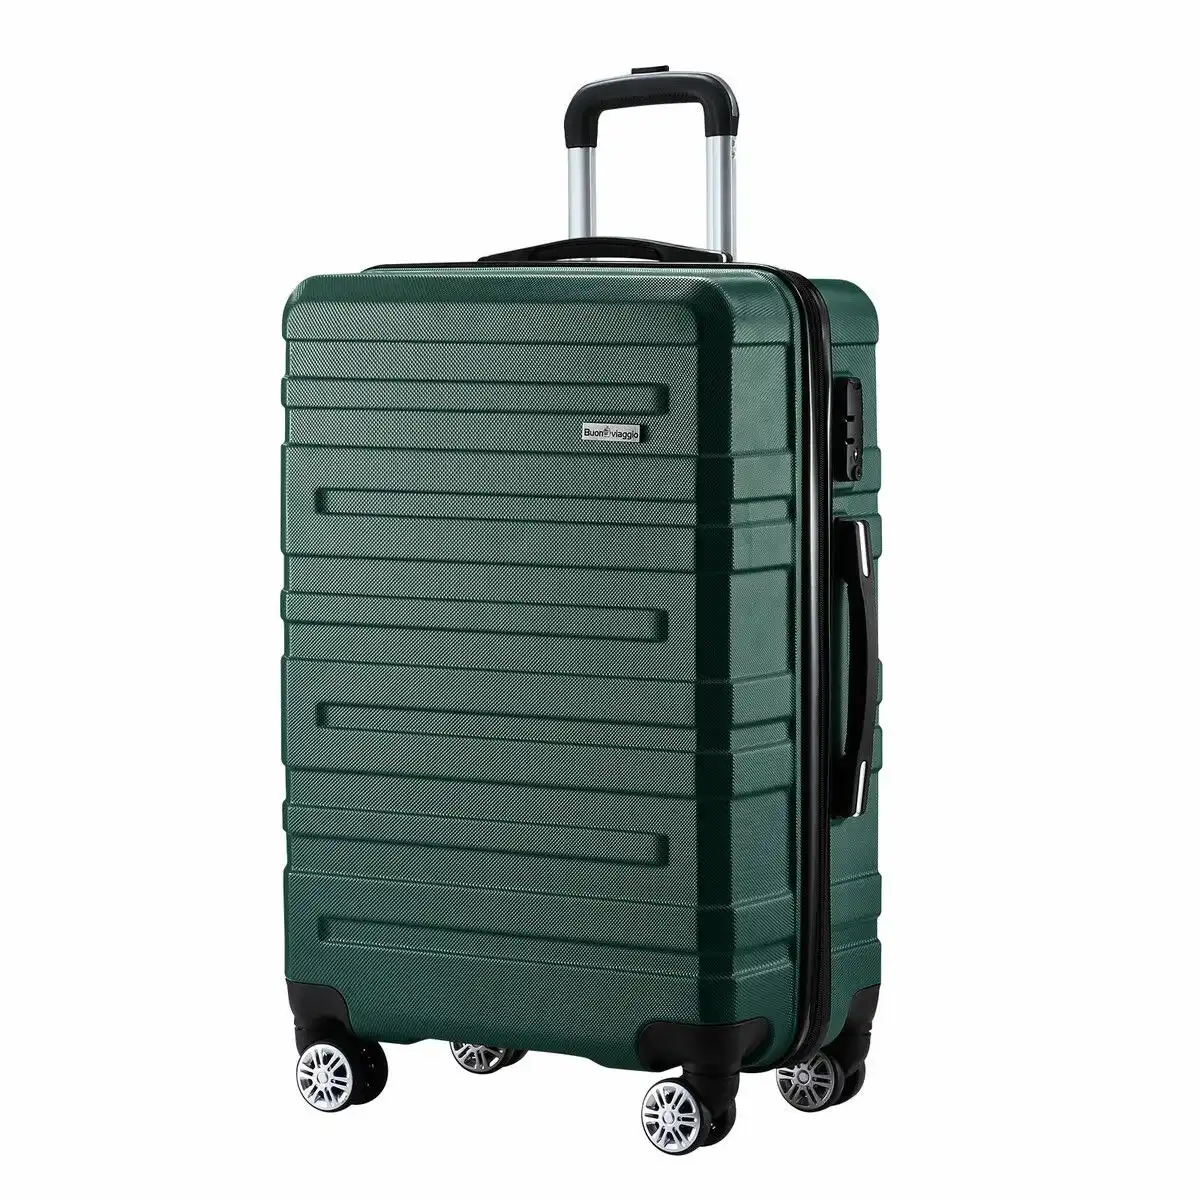 Buon Viaggio Carry On Luggage Suitcase Traveller Bag Travel Hard Shell Case Lightweight with Wheels Checked Travelling Rolling Trolley TSA Lock Green